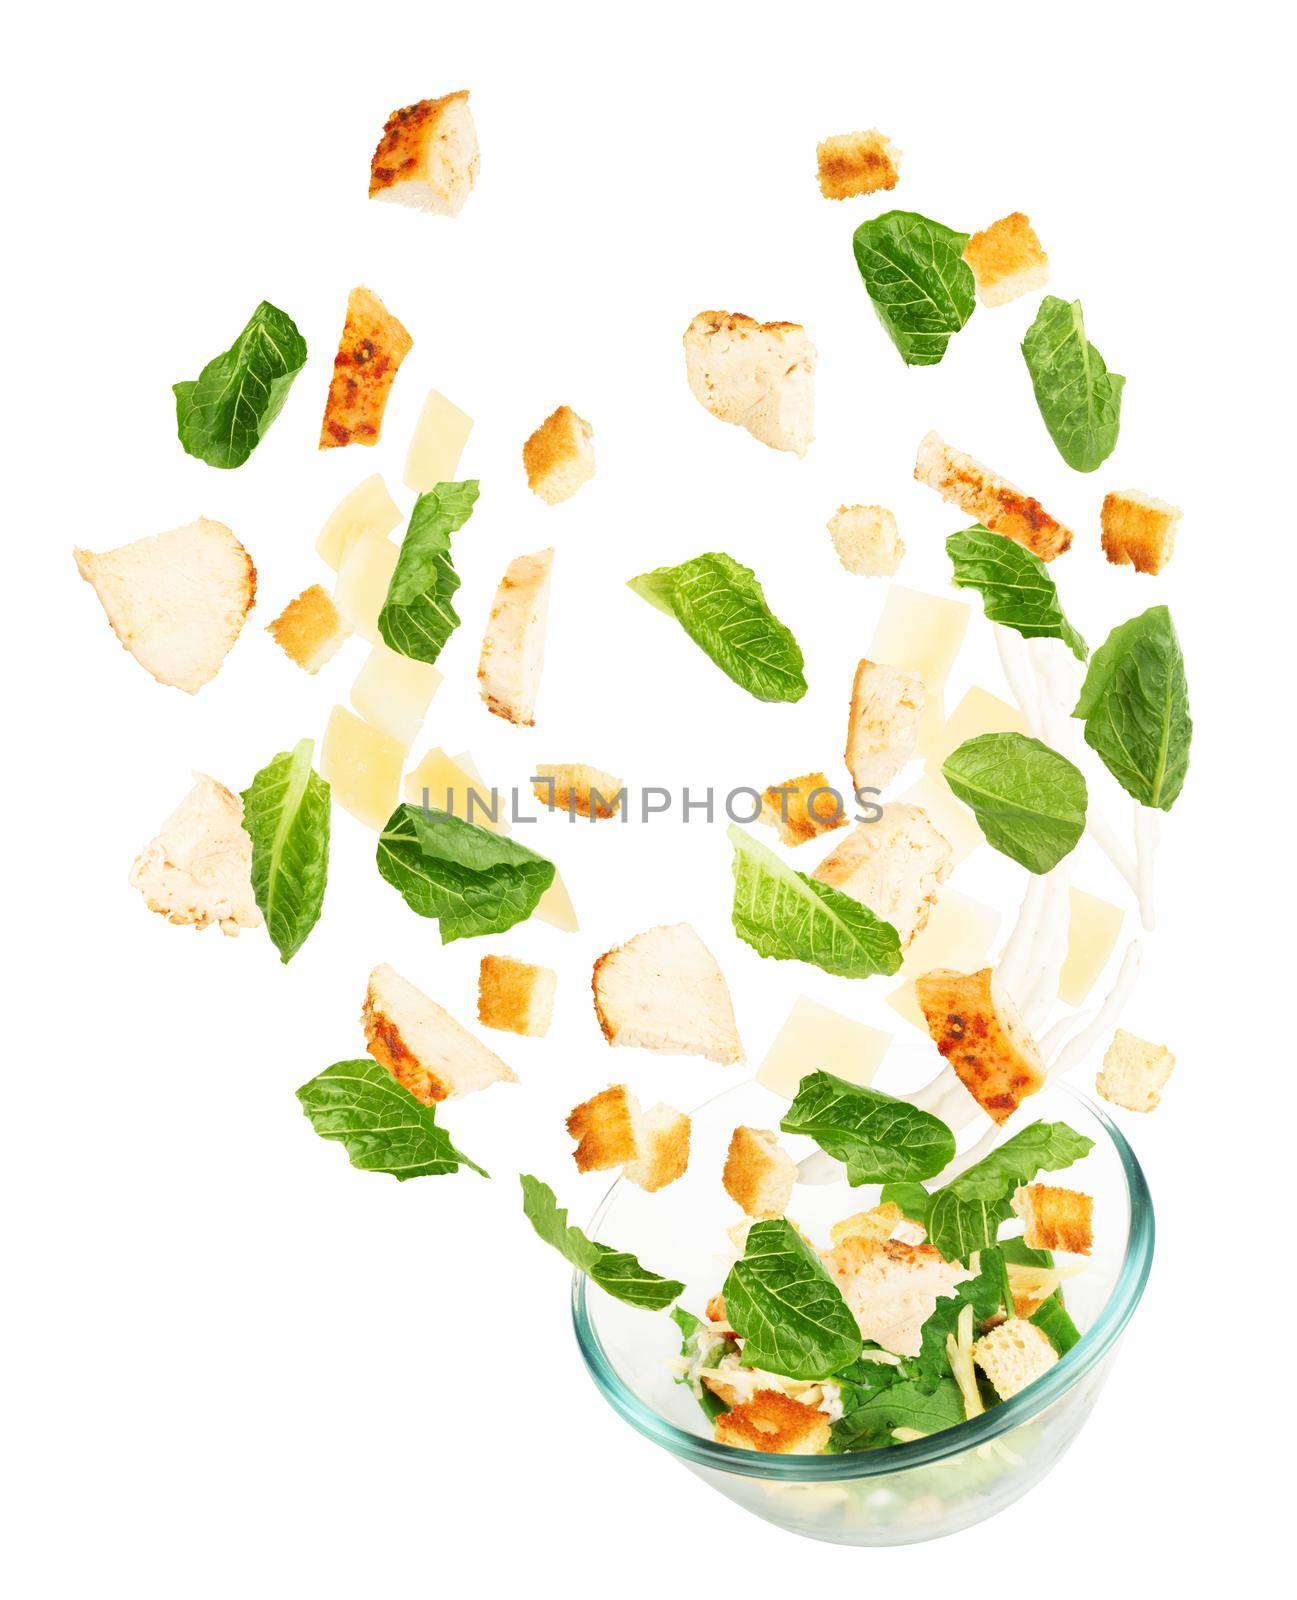 Glass salad bowl in flight with vegetables isolated on white background